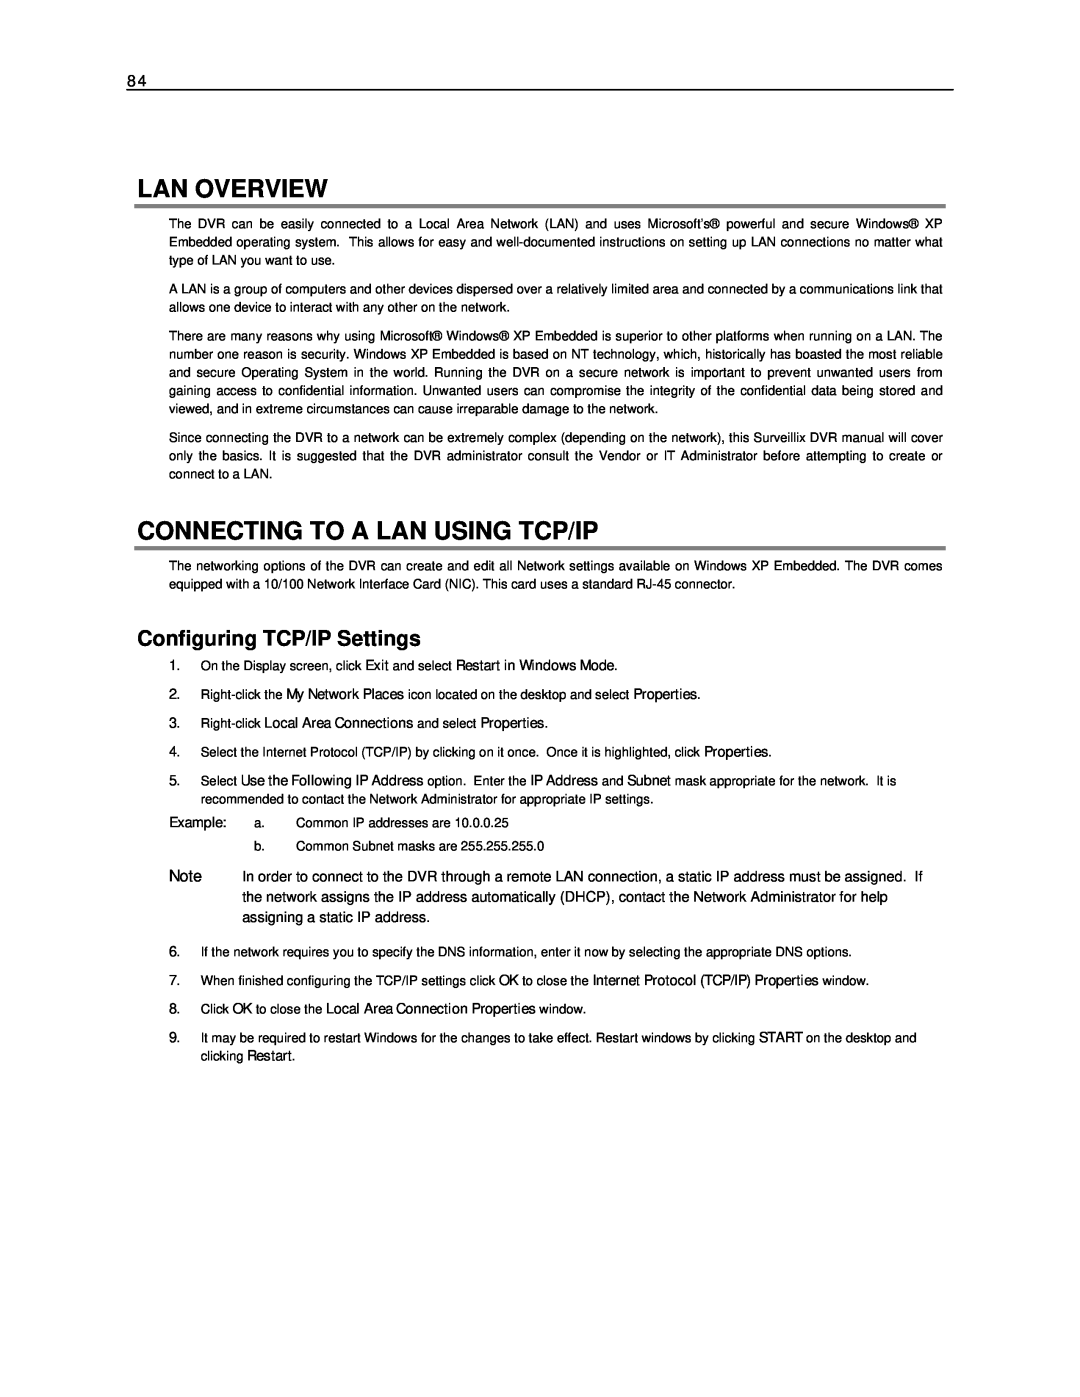 Toshiba NVS32-X, NVS16-X, NVS8-X user manual Lan Overview, Connecting To A Lan Using Tcp/Ip, Configuring TCP/IP Settings 